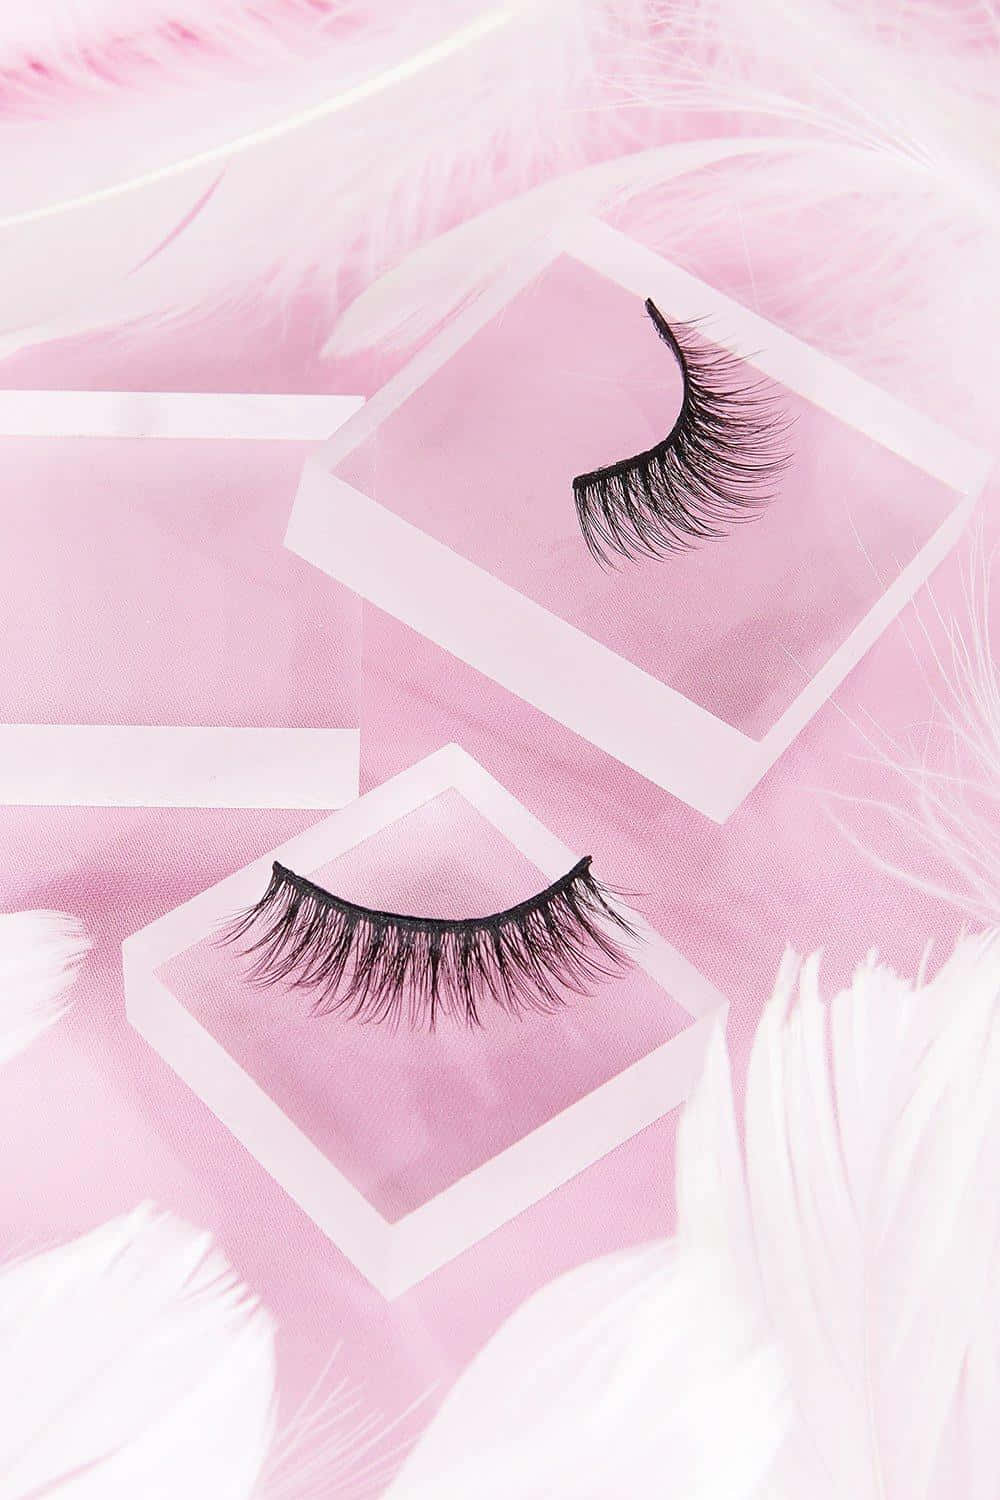 A Pair Of False Eyelashes On A Pink Background